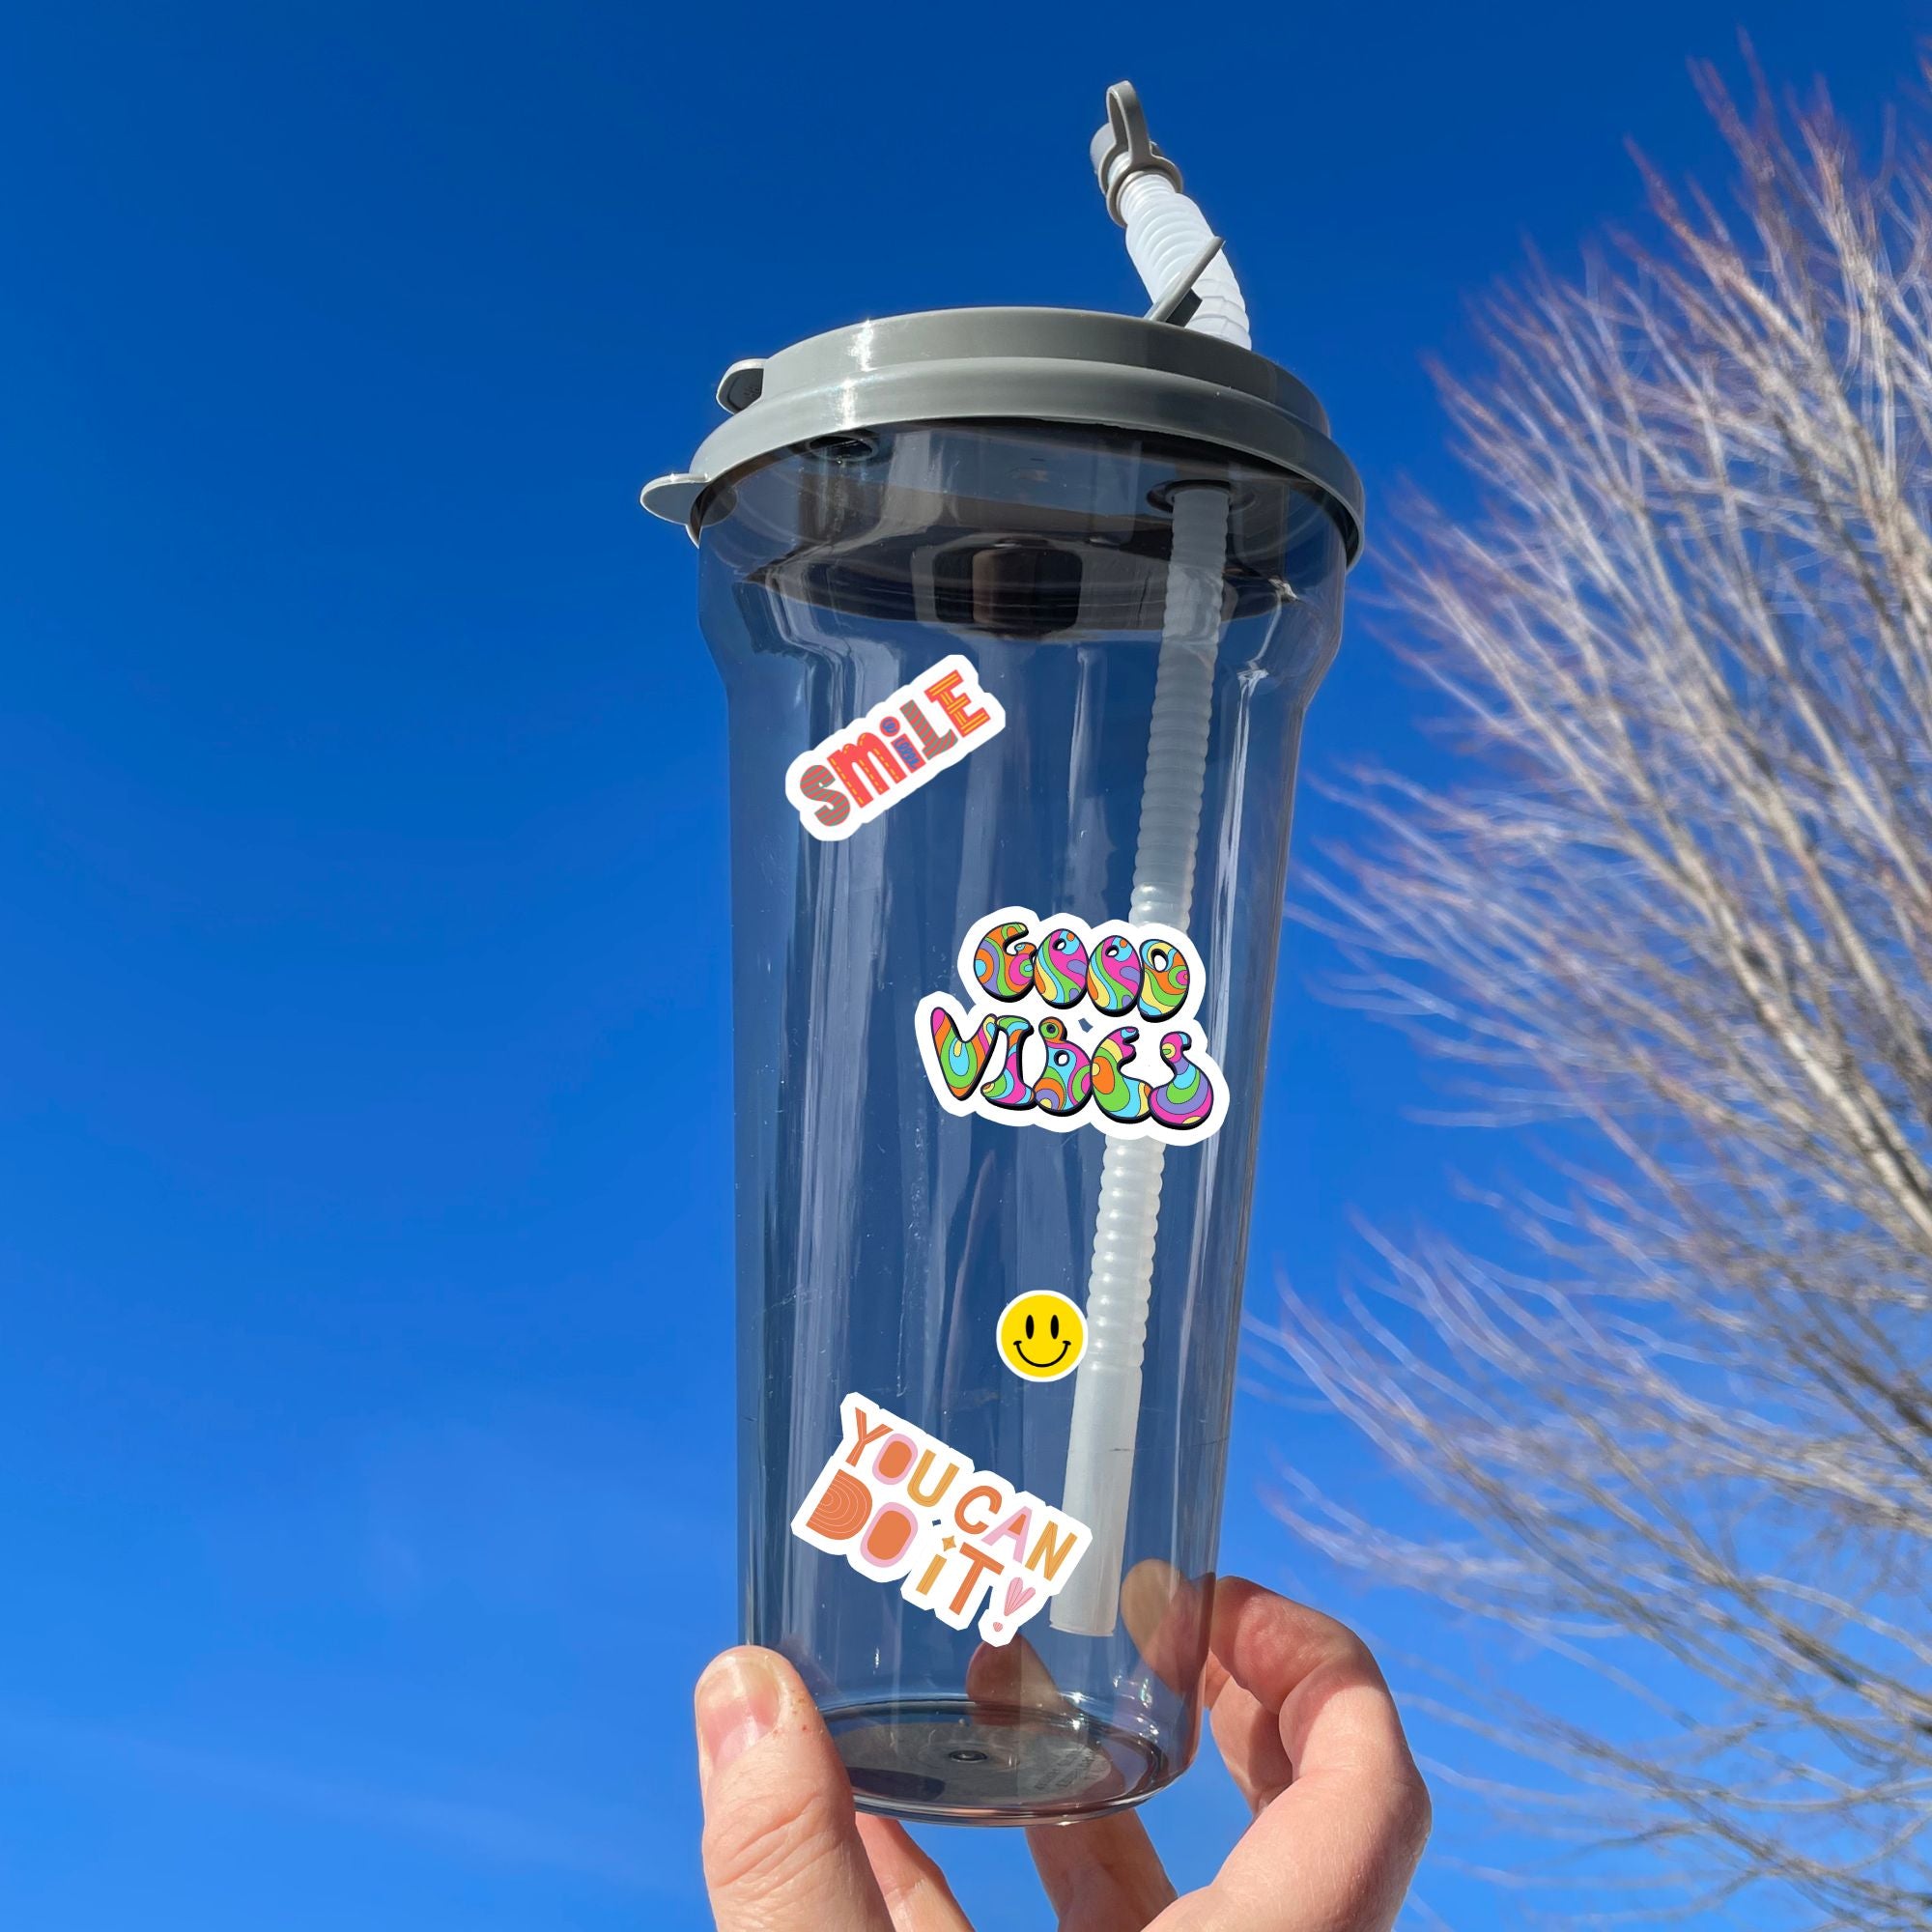 Feel good with these inspirational thoughts as stickers! This sheet has a dozen stickers with inspirational sayings, plus some smaller stickers to help brighten anyone's day. This image shows a water bottle with "Smile", "Good Vibes", and "You can do it!" stickers along with a small happy face applied to the bottle.